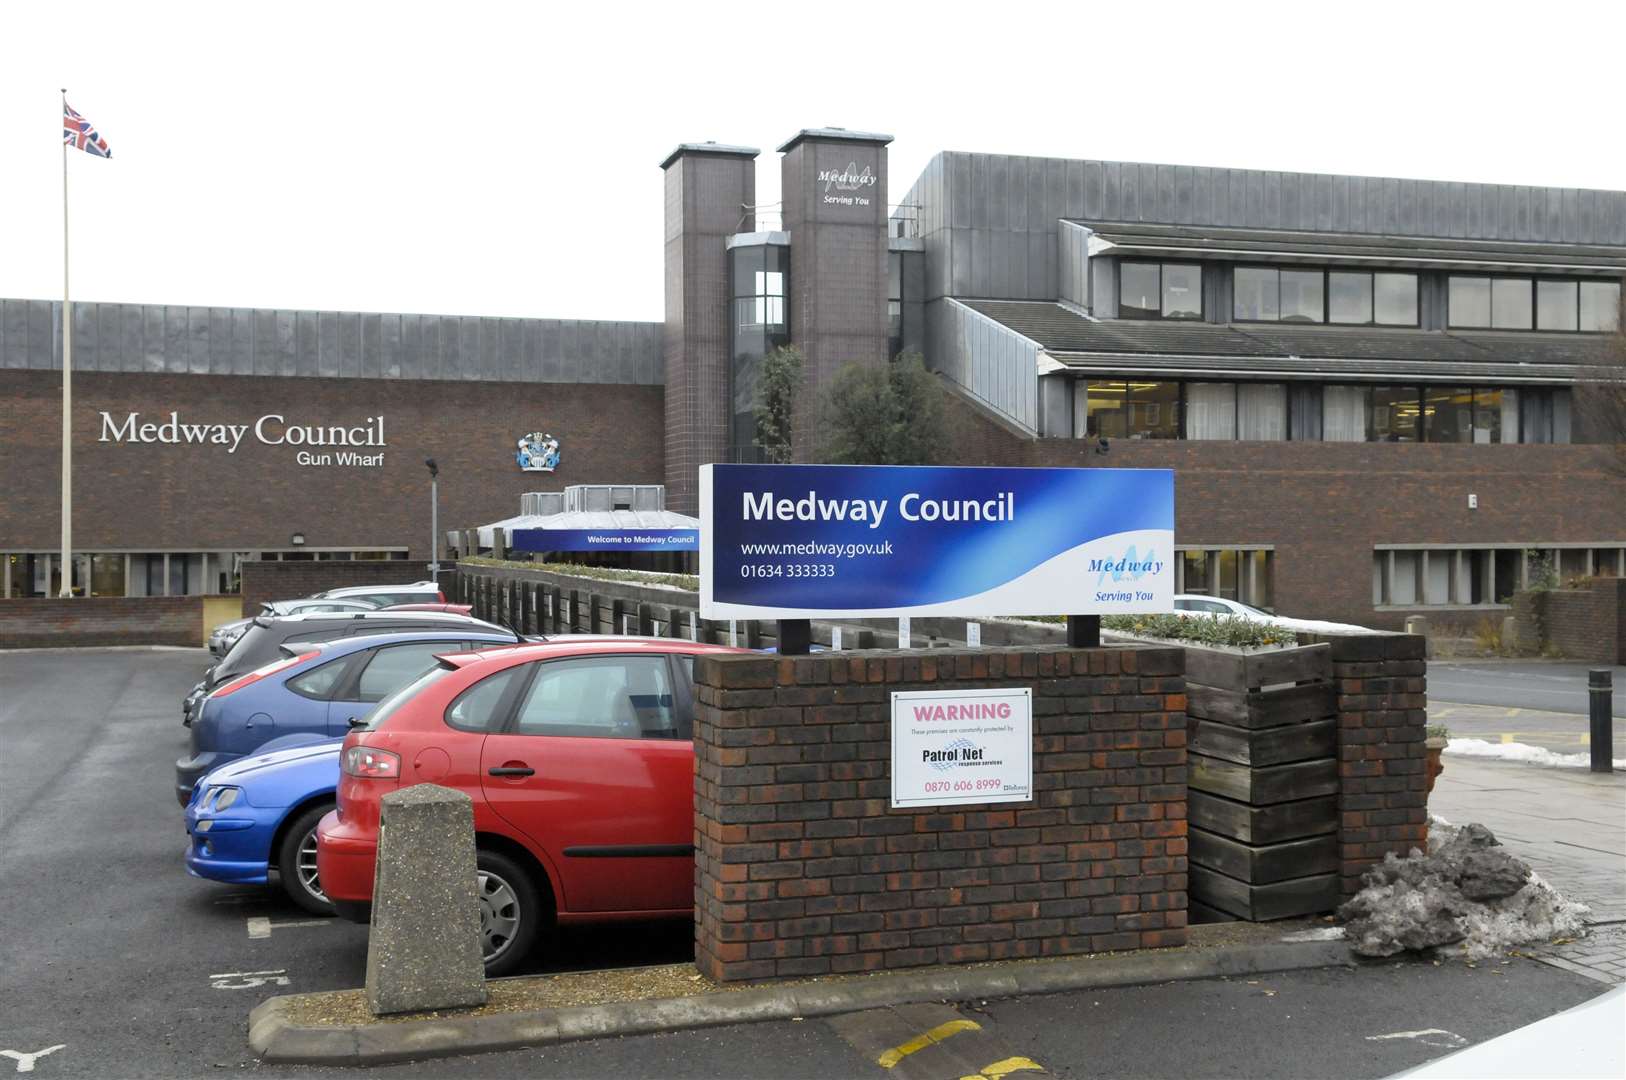 Medway Council has been given £6.6m extra cash to fund coronavirus support services